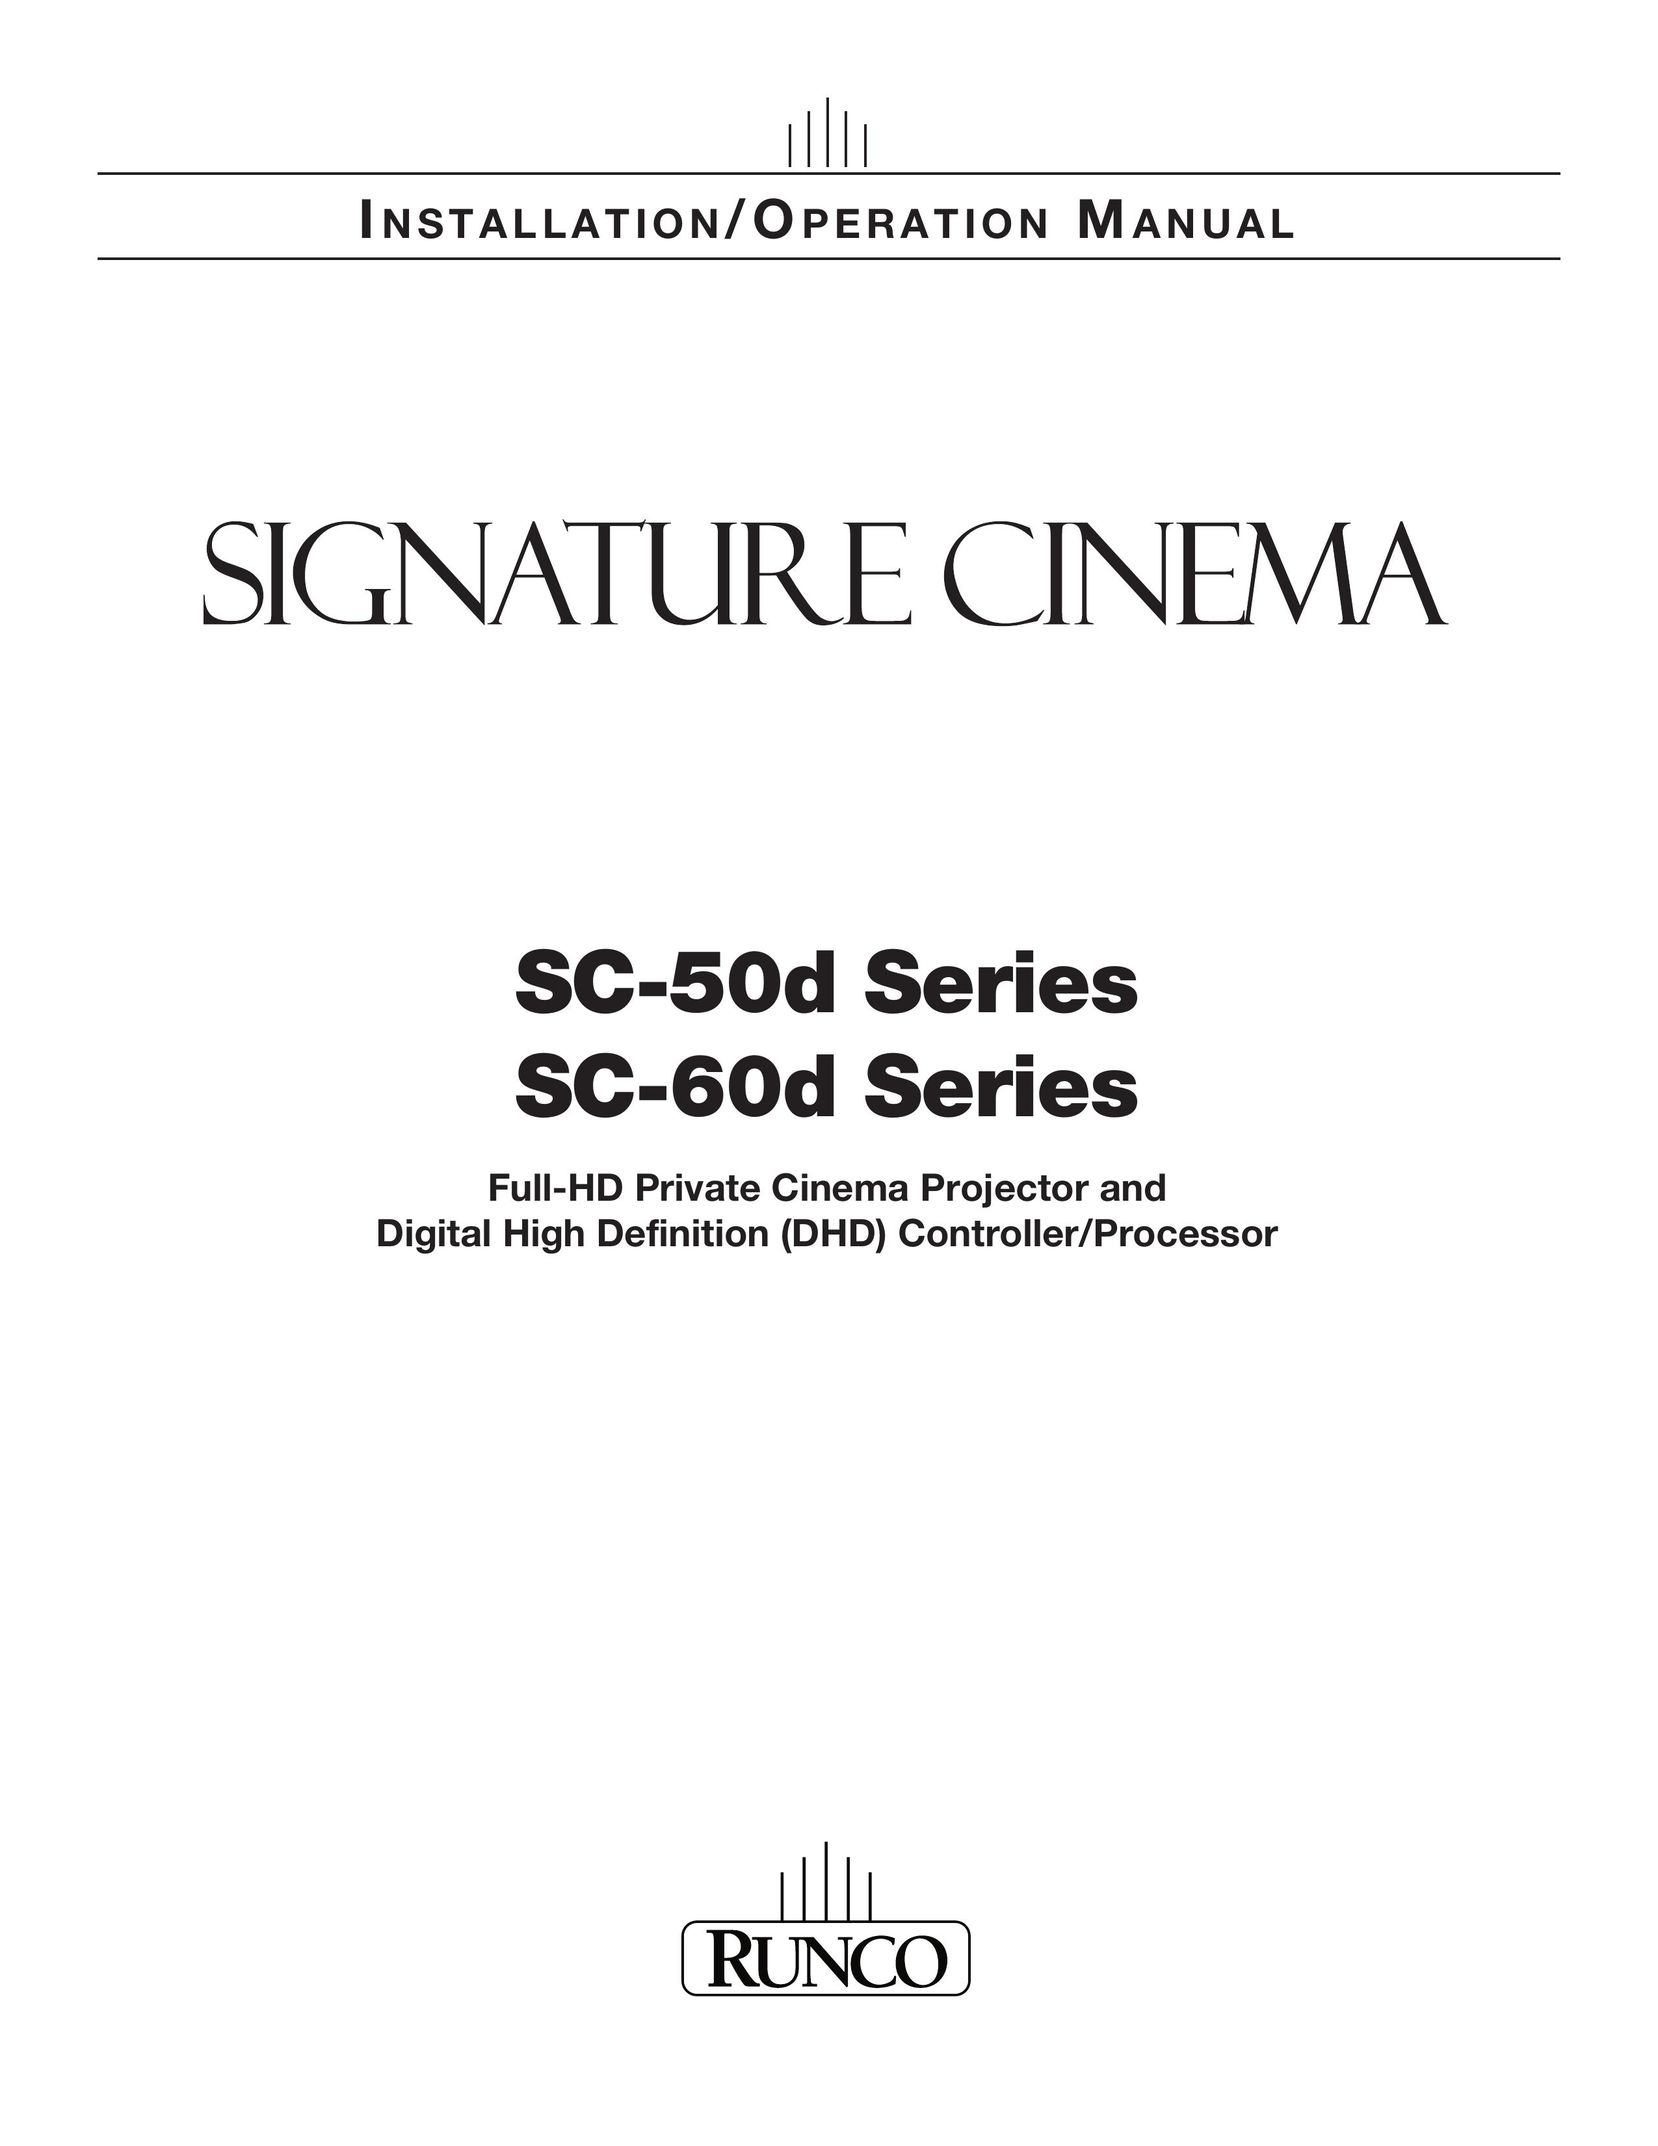 Runco SC-50D Home Theater System User Manual